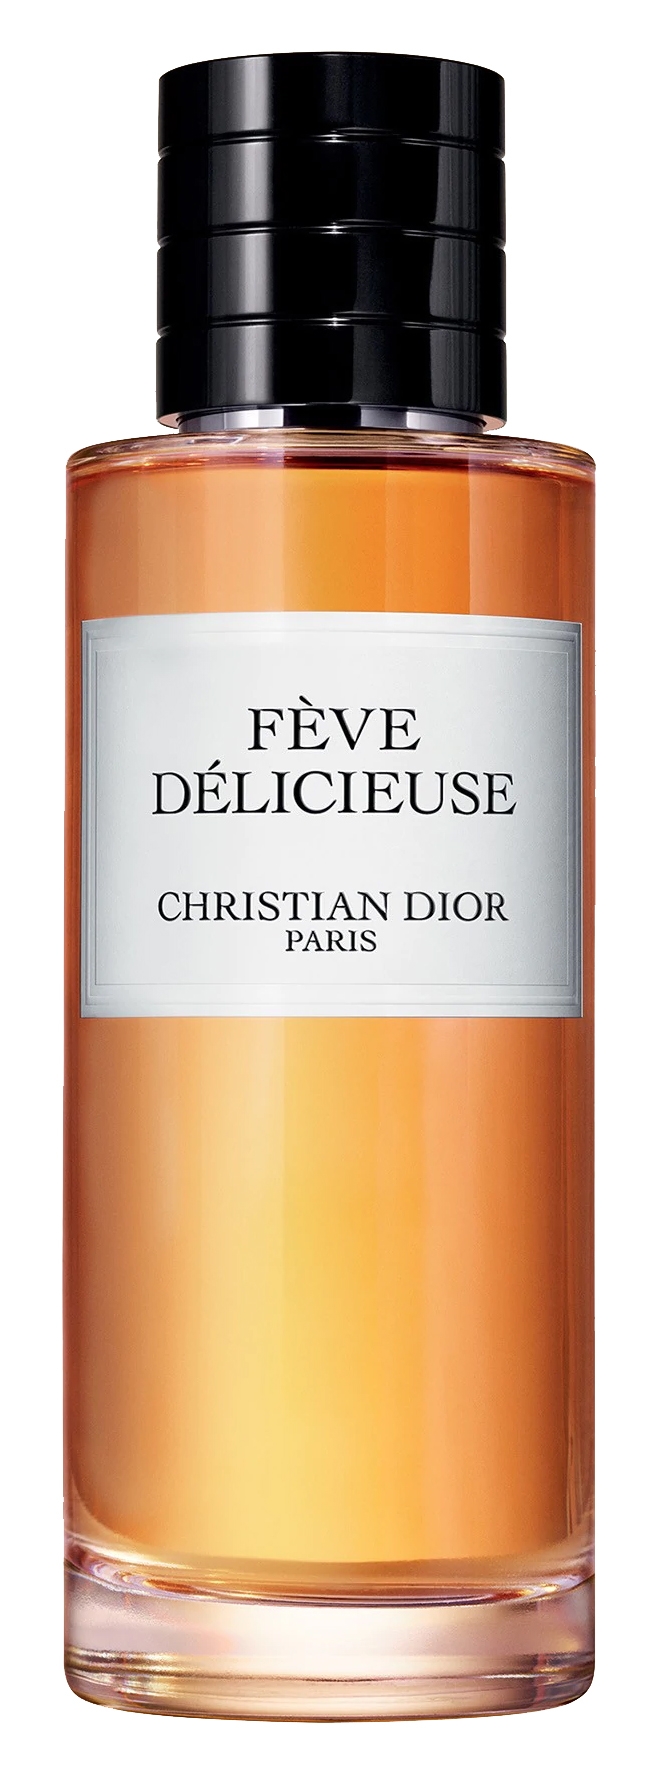 feve delicieuse dior